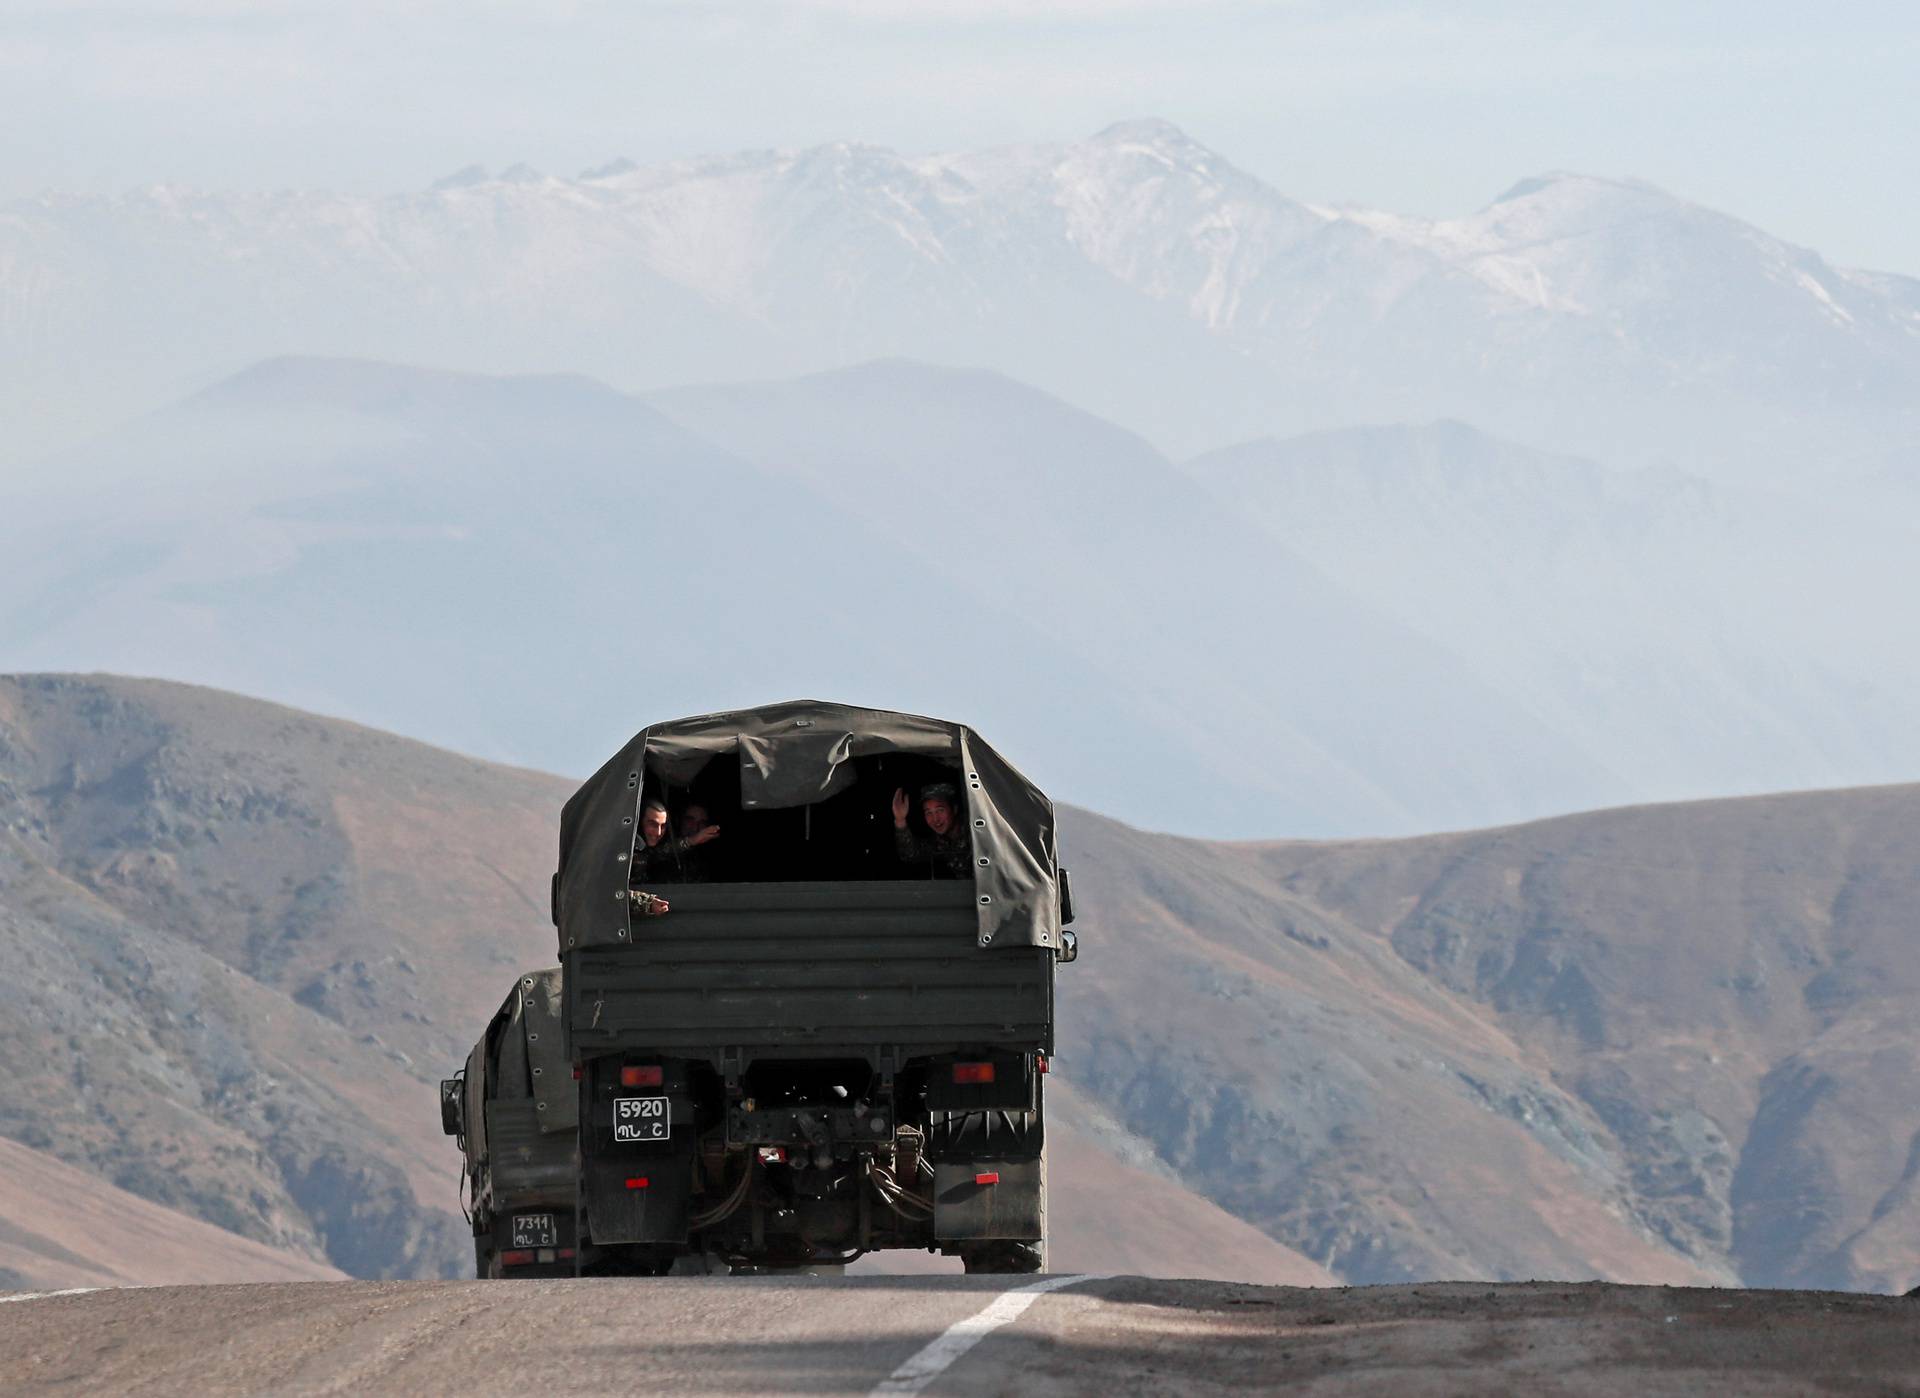 Ethnic Armenian soldiers ride in the back of a truck on the road that links Armenia and the region of Nagorno-Karabakh